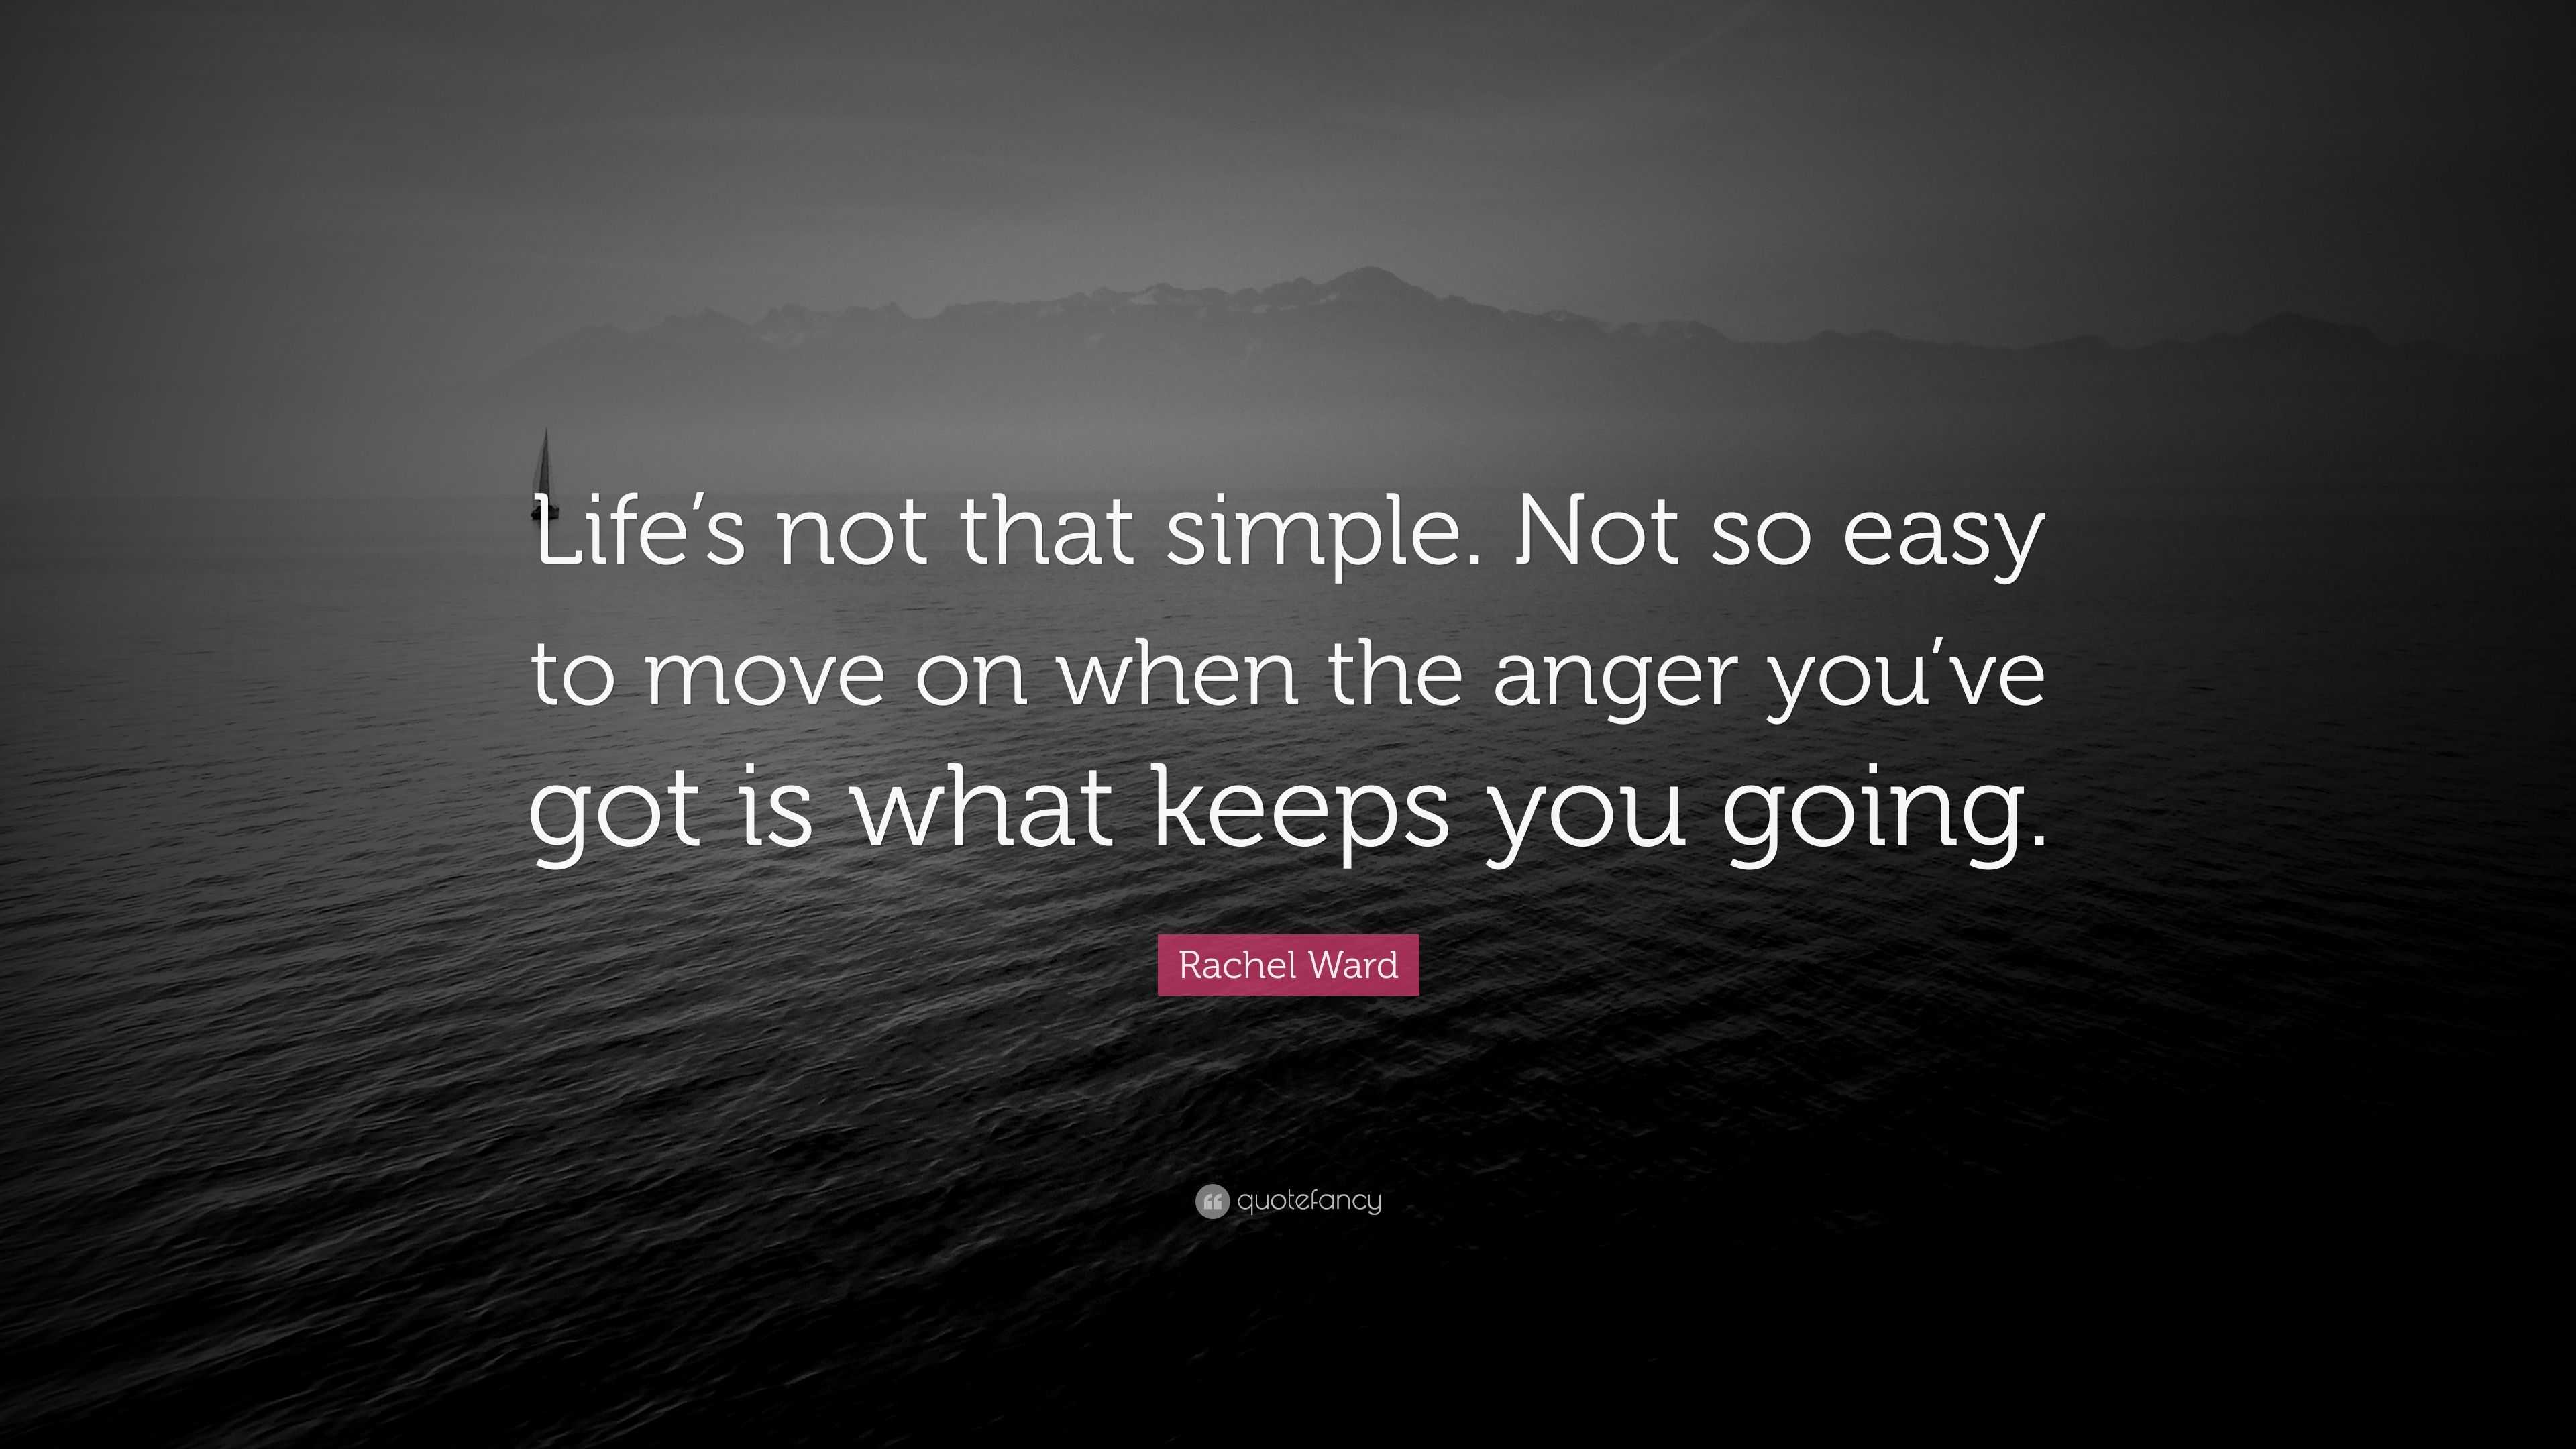 Rachel Ward Quote Life S Not That Simple Not So Easy To Move On When The Anger